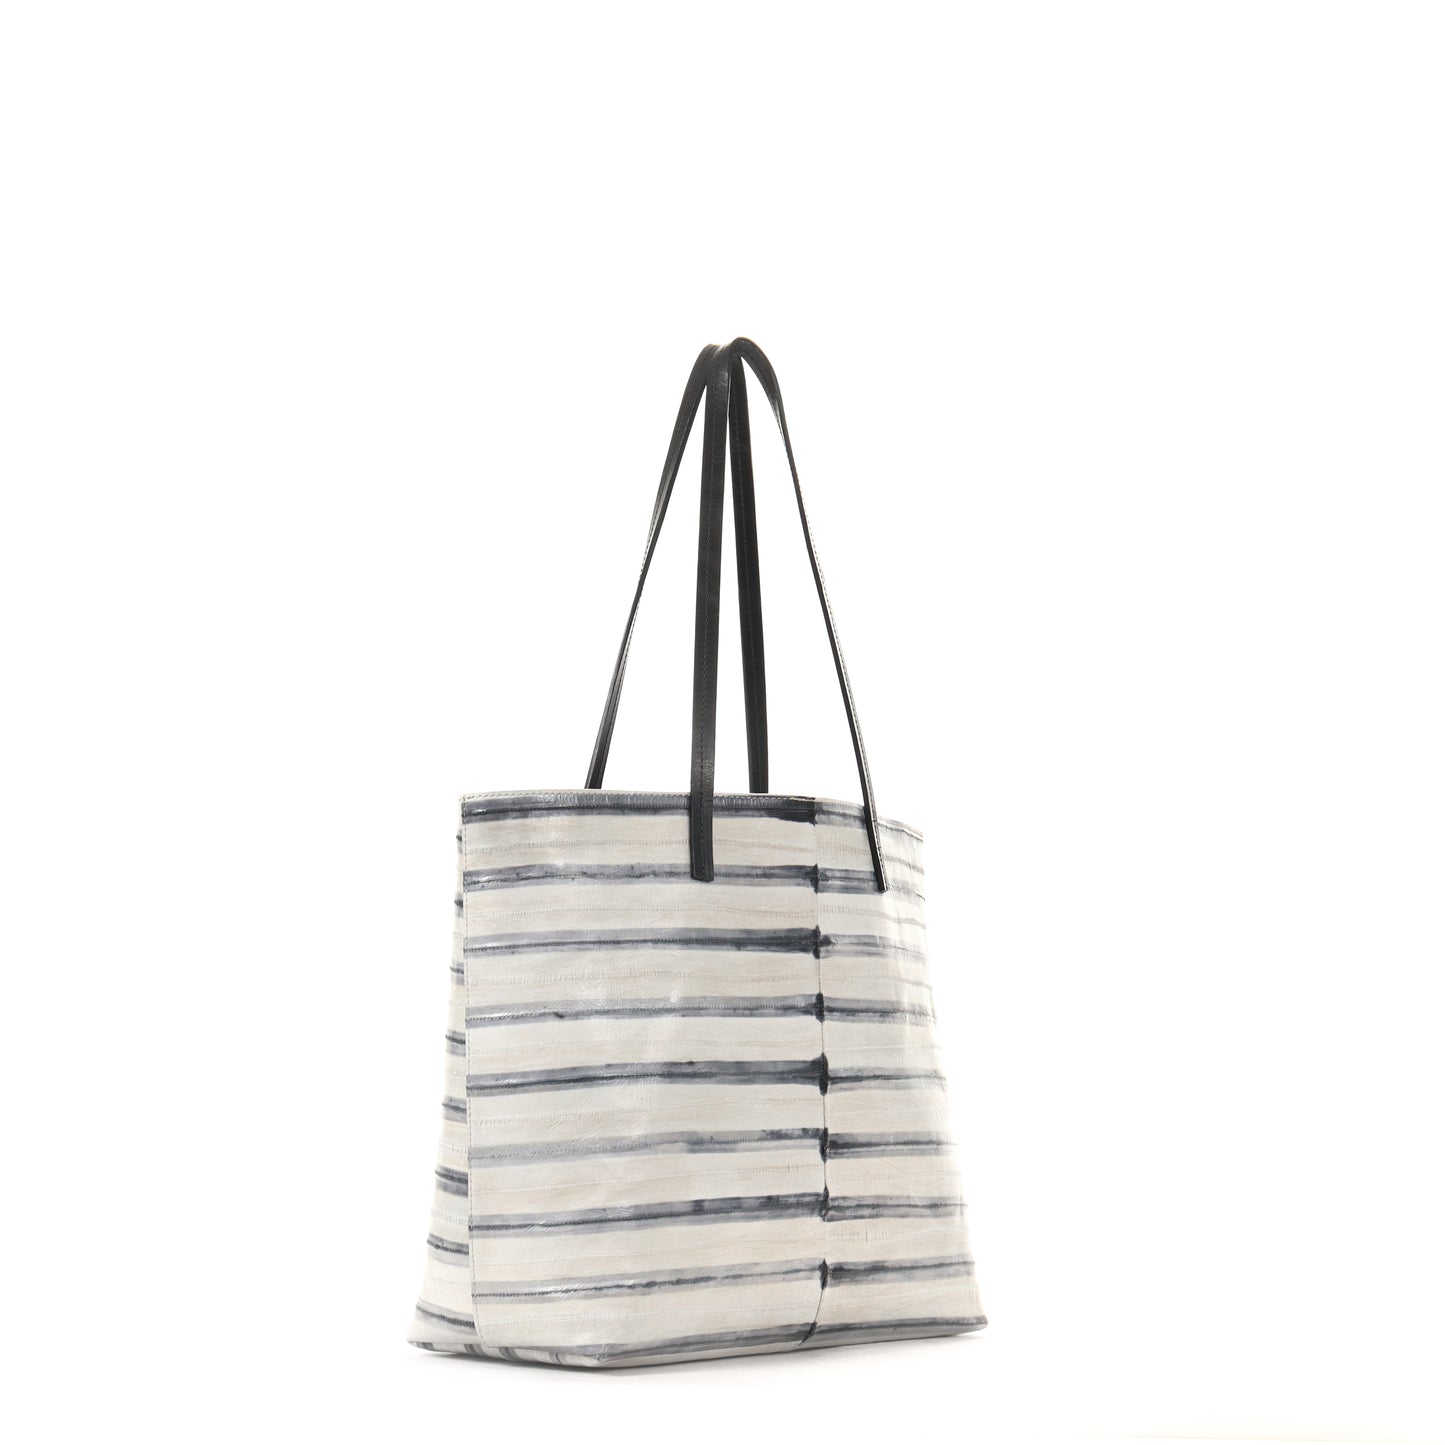 ESSENTIAL TOTE STRIPED EEL